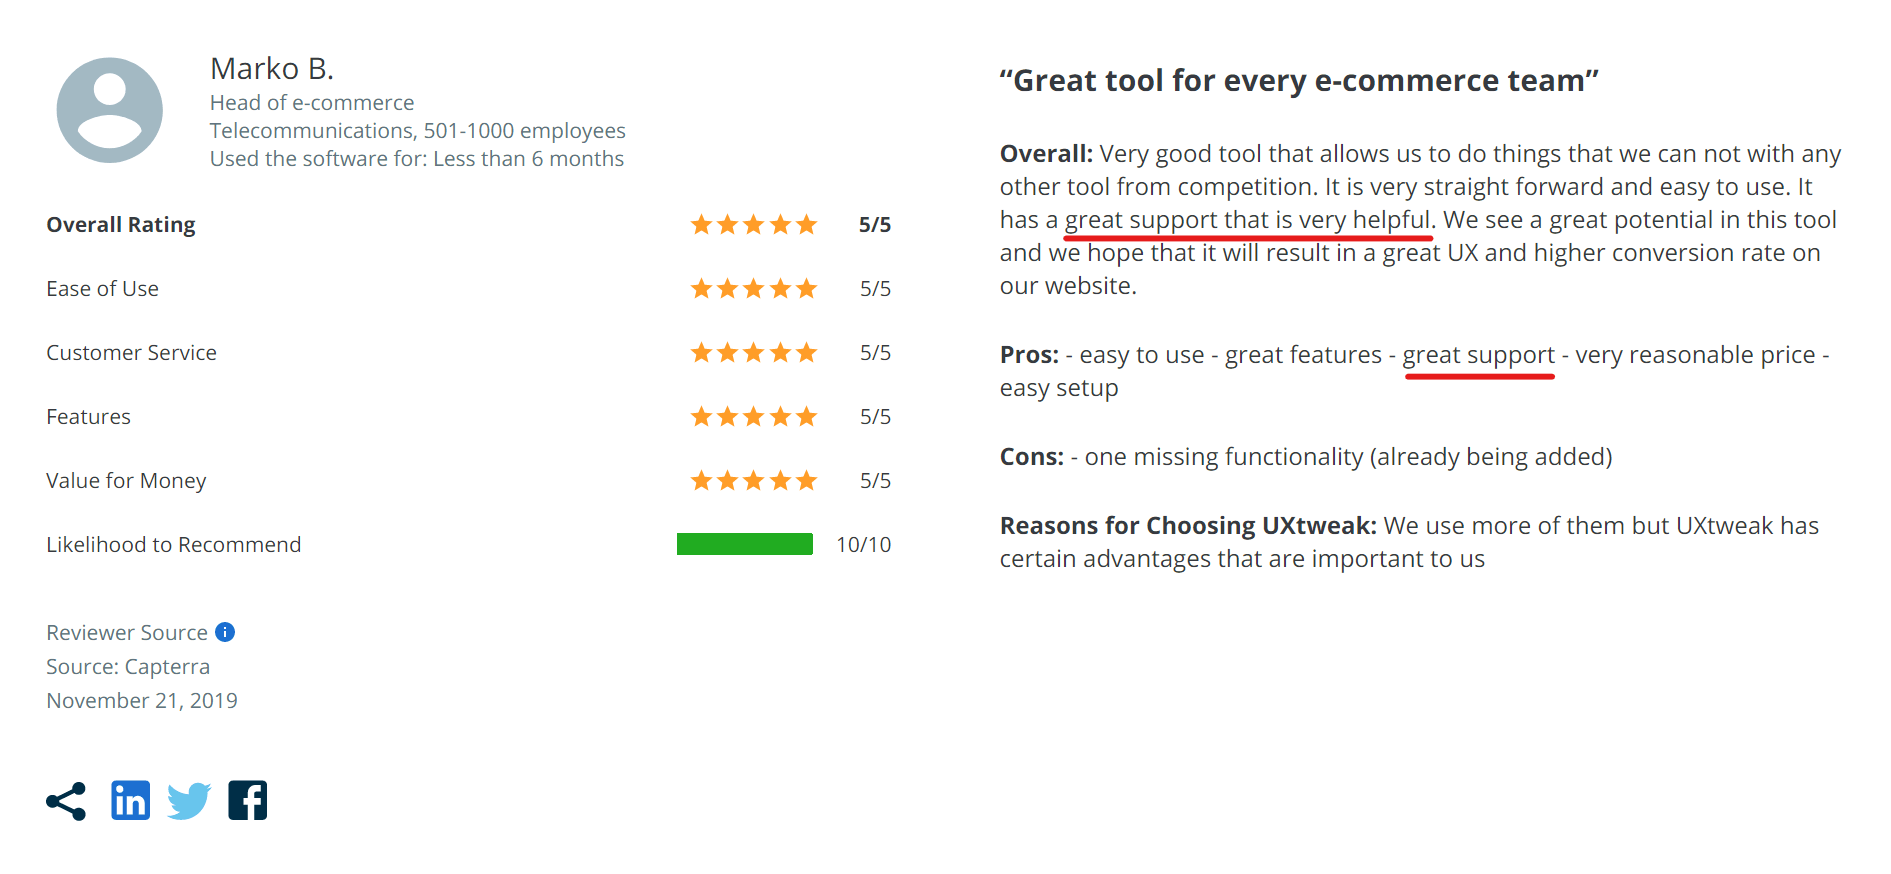 According to the review UXtweak support is great and helpful